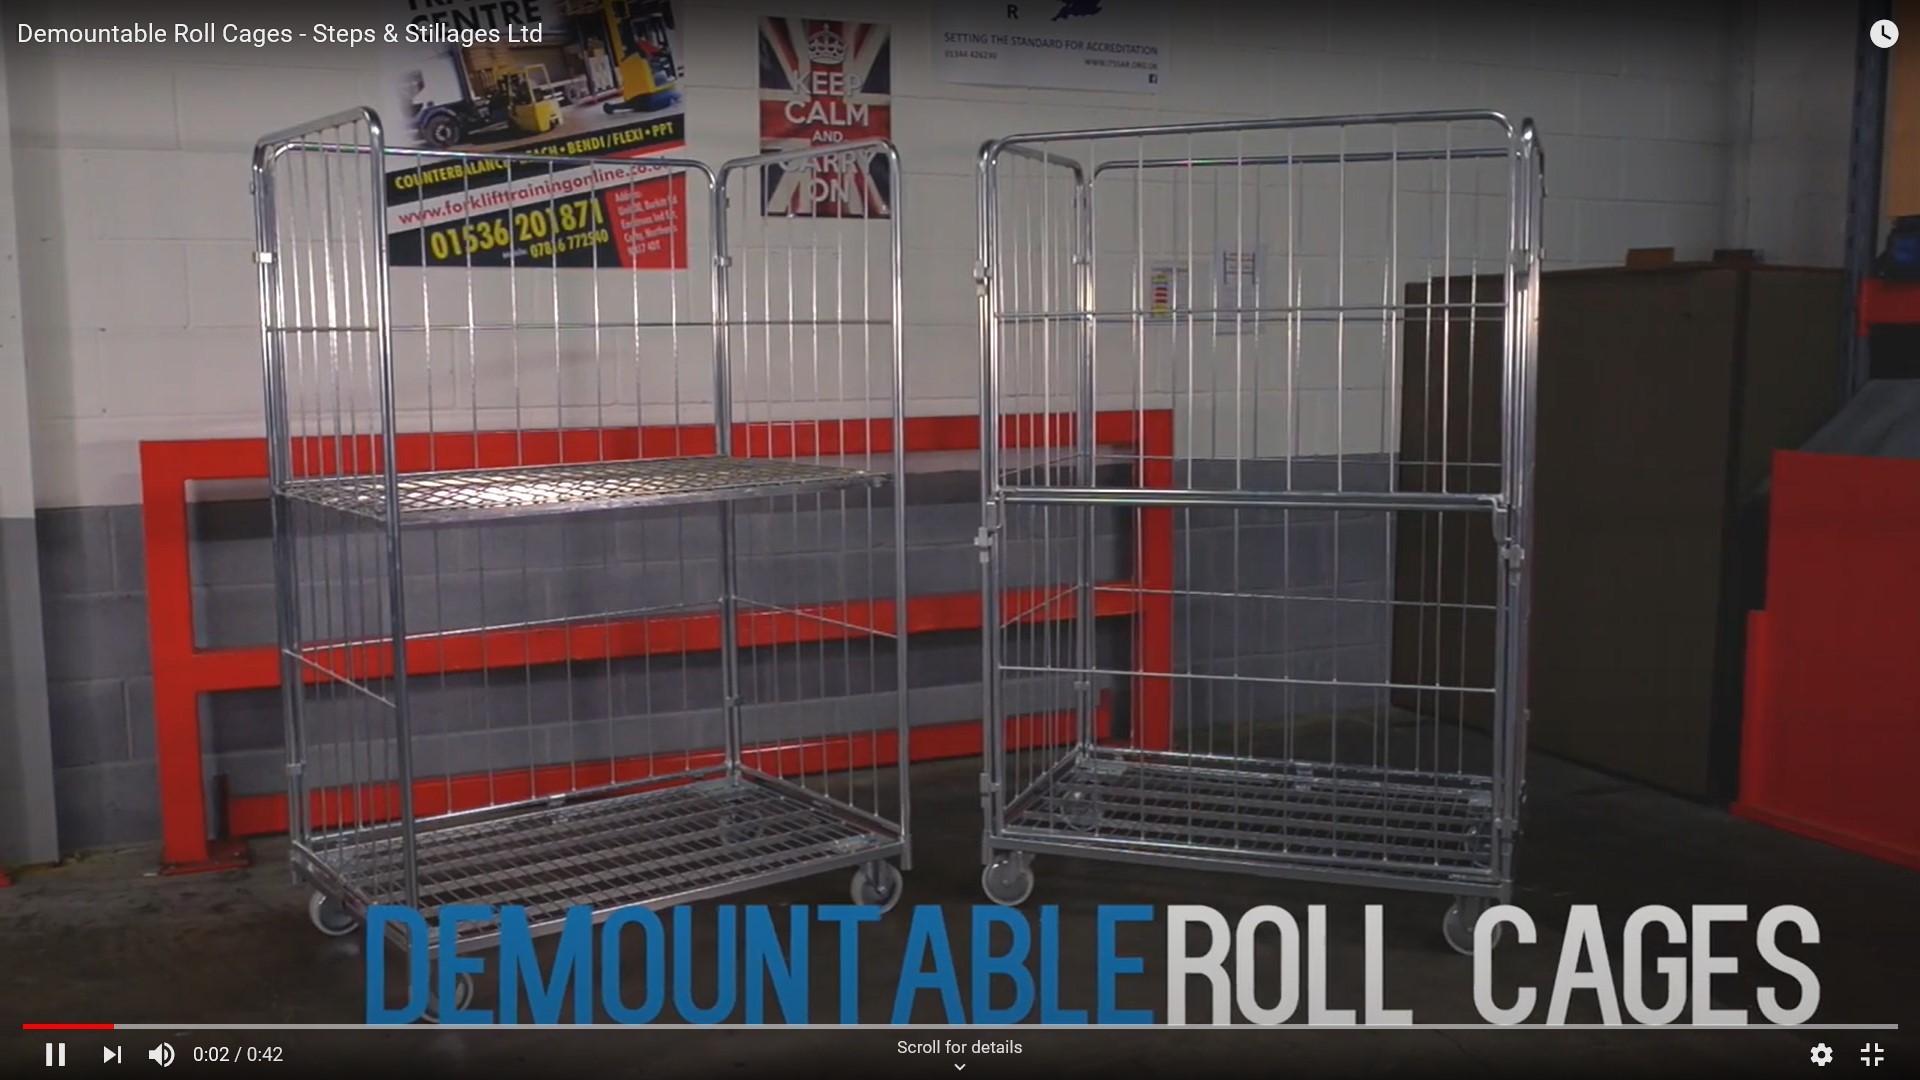 Demountable roll cage video